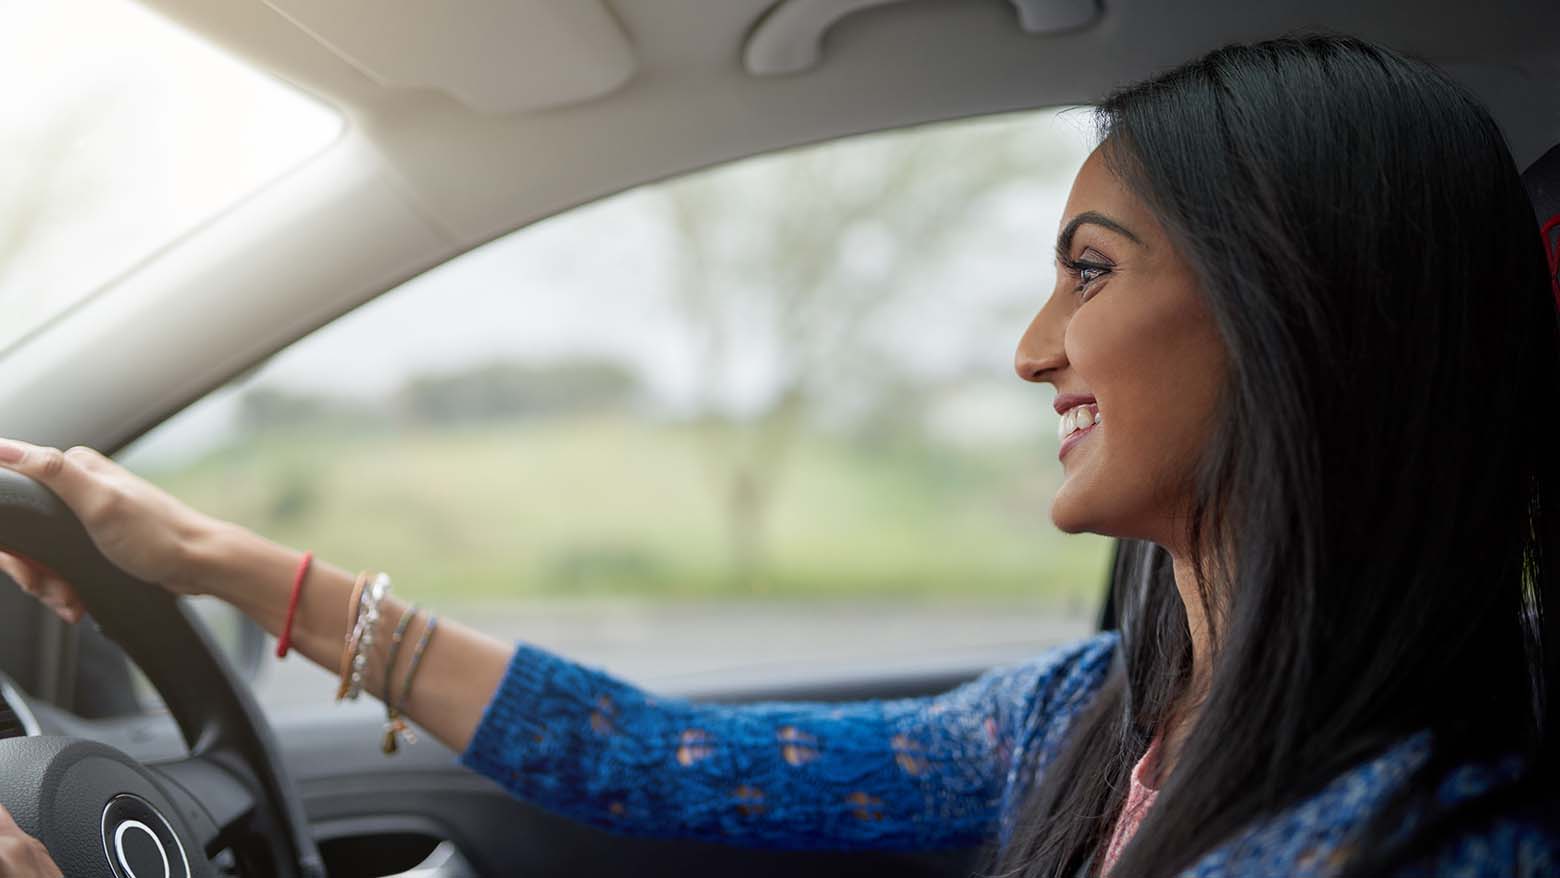 A woman smiles while driving a car